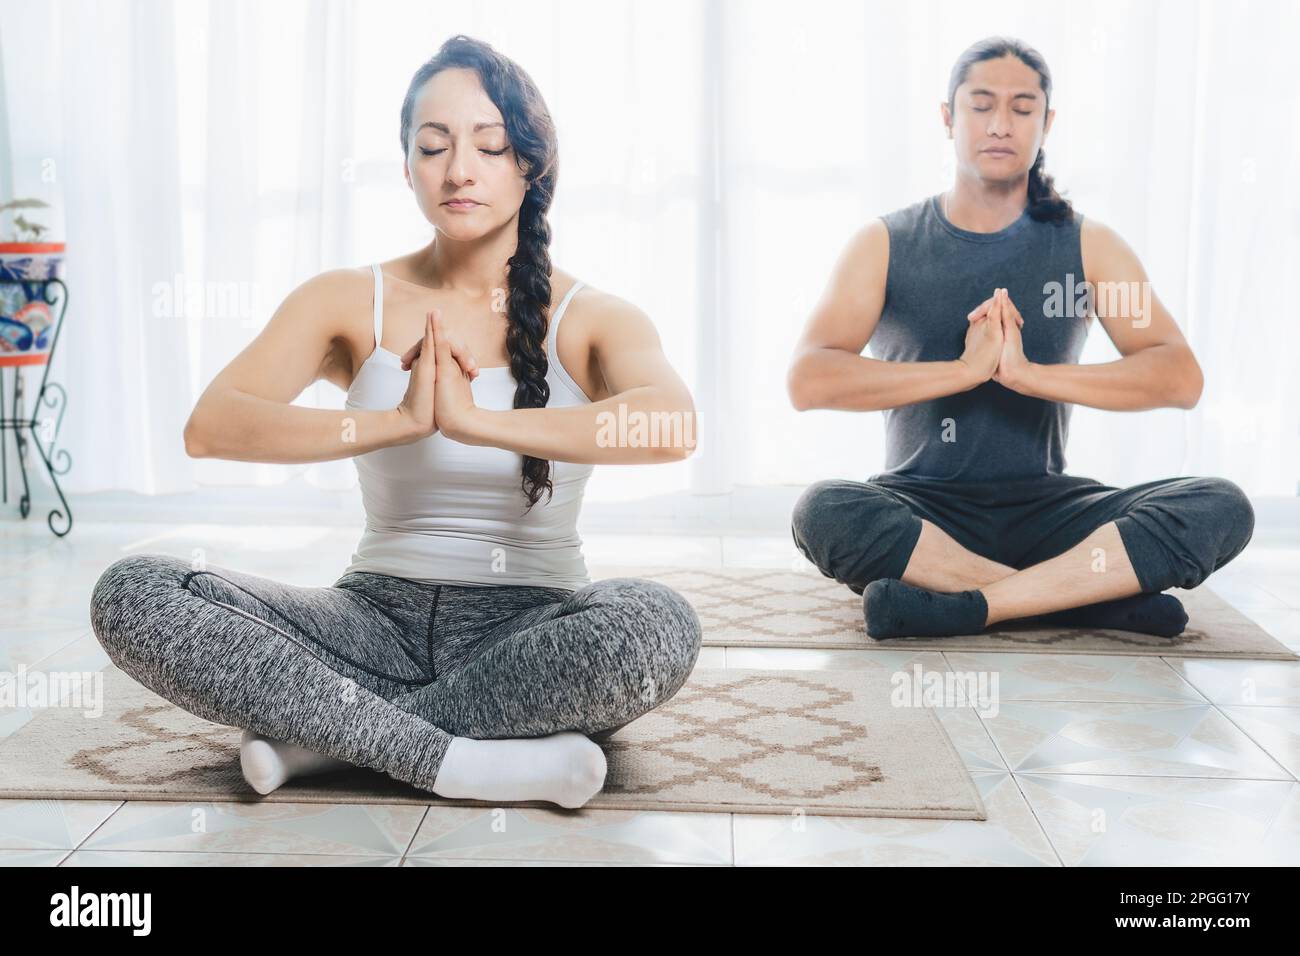 Two middle-aged people are doing Yoga indoors, with lots of sunlight coming in through the window, doing deep meditation positions. There is a lot of Stock Photo